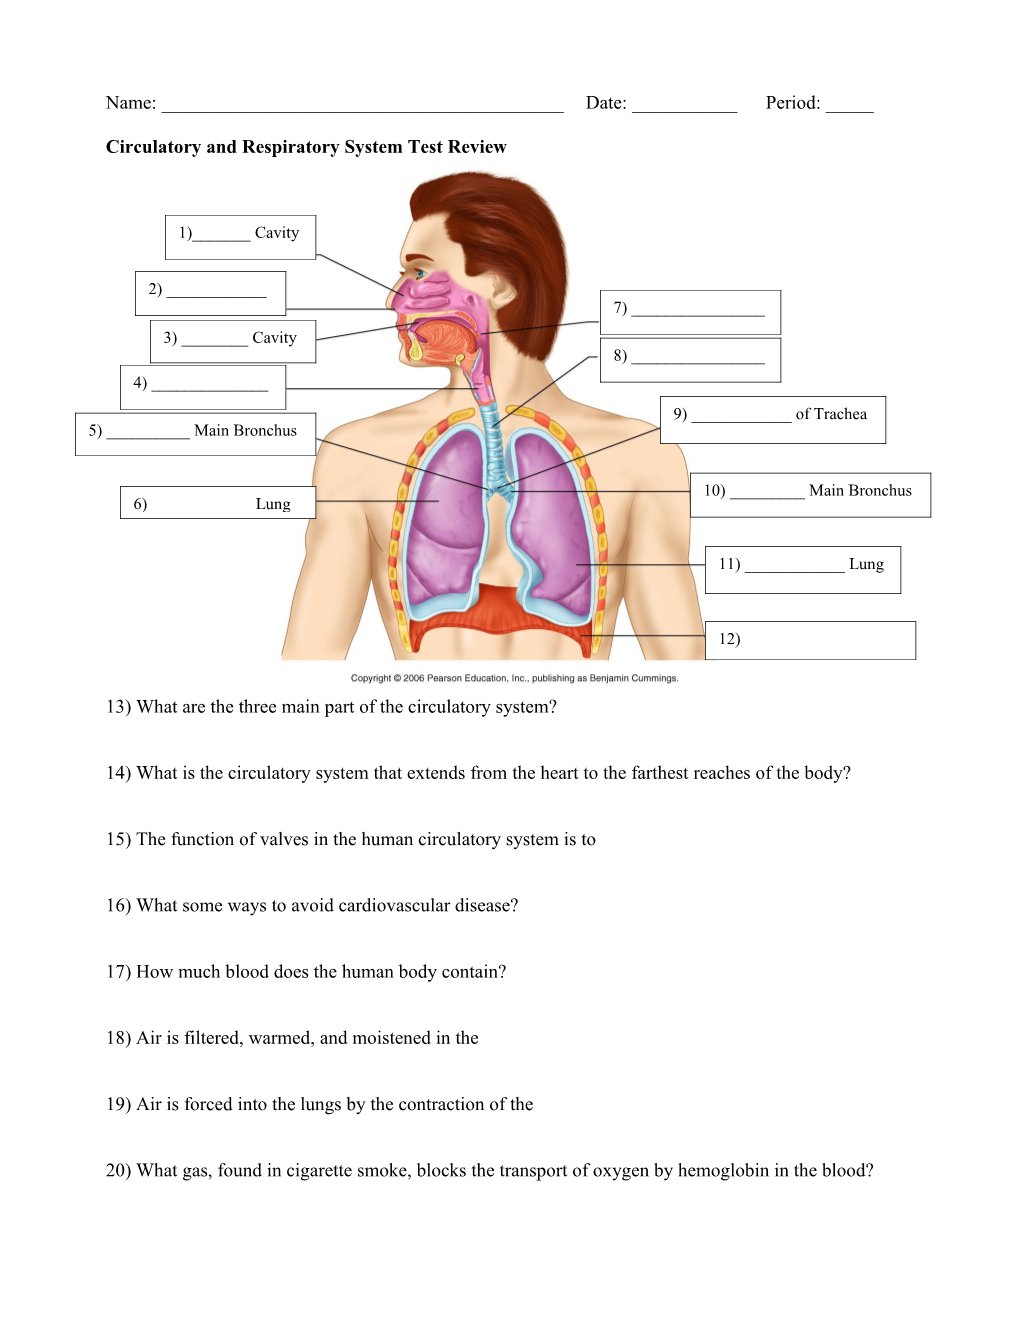 Circulatory and Respiratory System Test Review